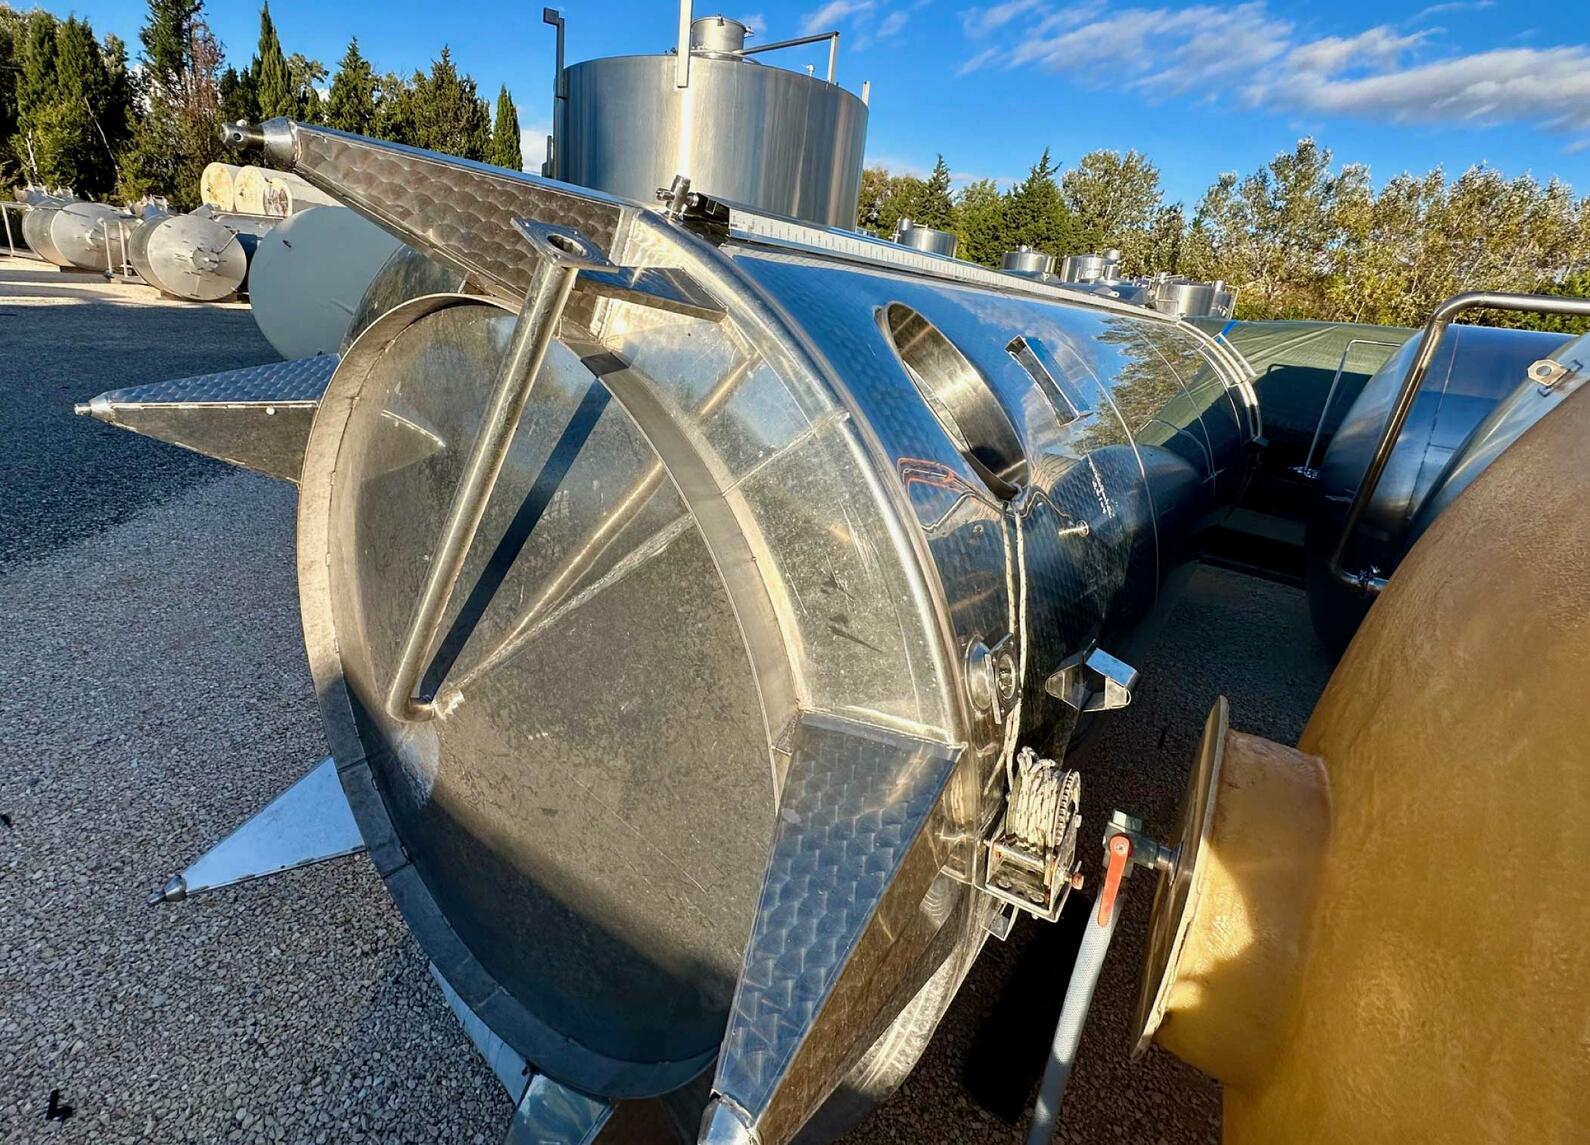 Stainless steel tank with floating lid - Conical bottom - On feet